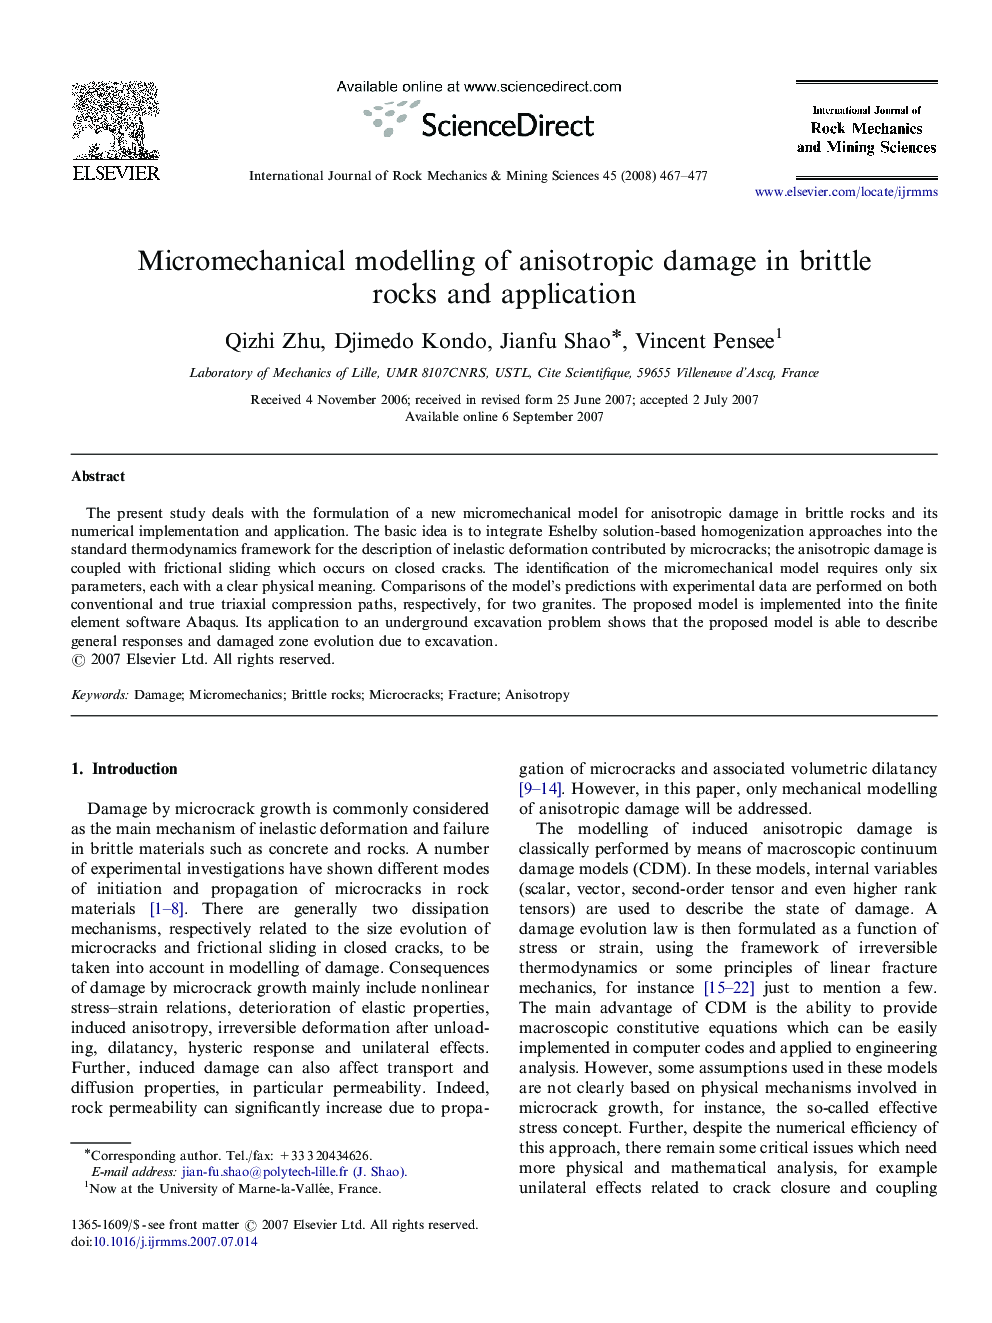 Micromechanical modelling of anisotropic damage in brittle rocks and application